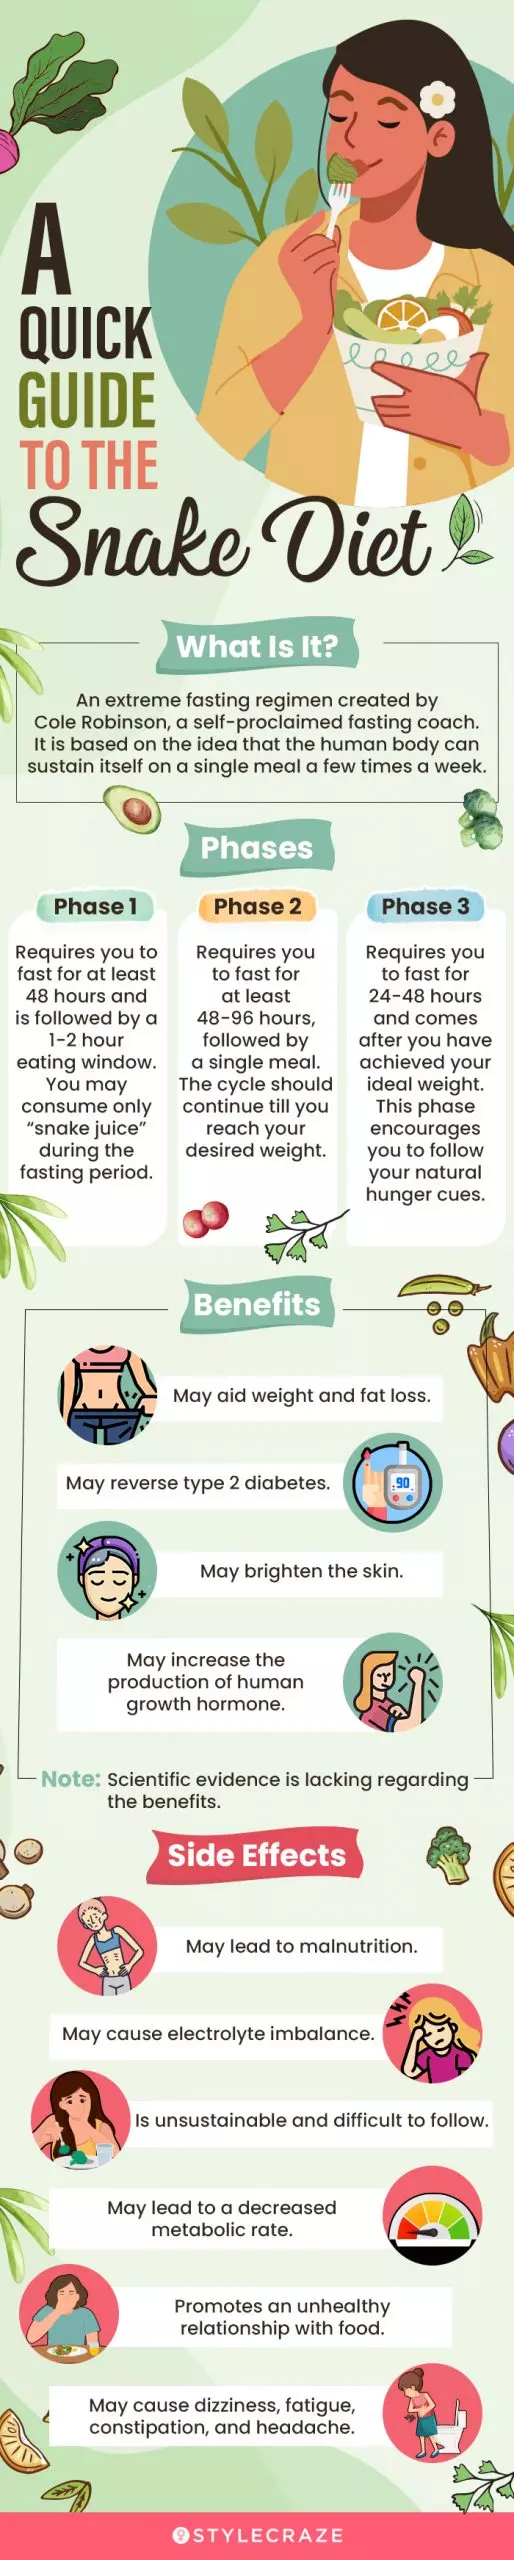 a quick guide to the snake diet (infographic)